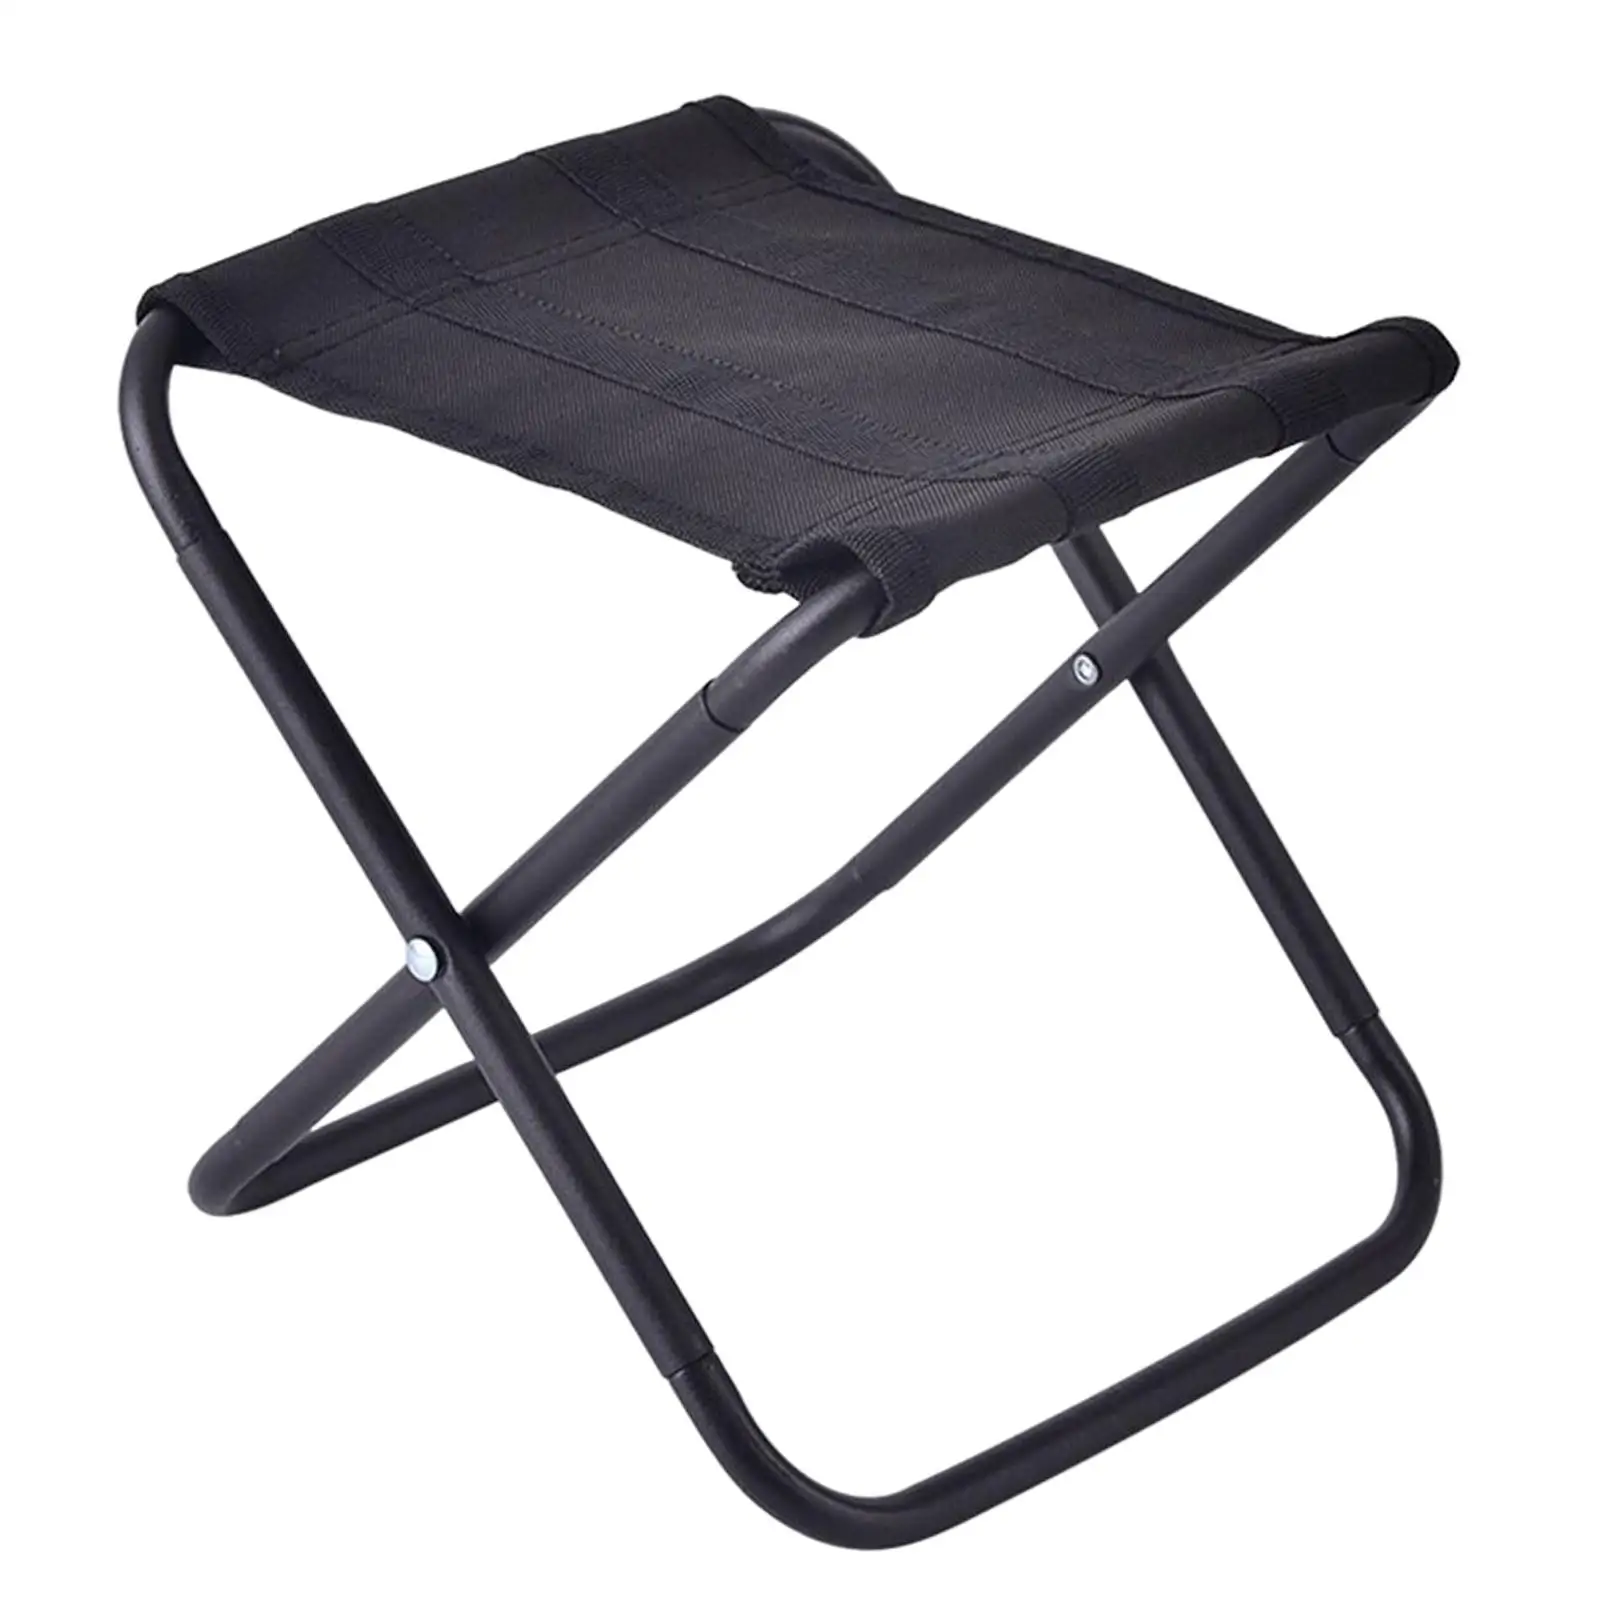 Folding Stool Lounger Chair Ottoman Fishing Chair Footrest Compact Foldable Footstool for Patio travel Fishing Hiking